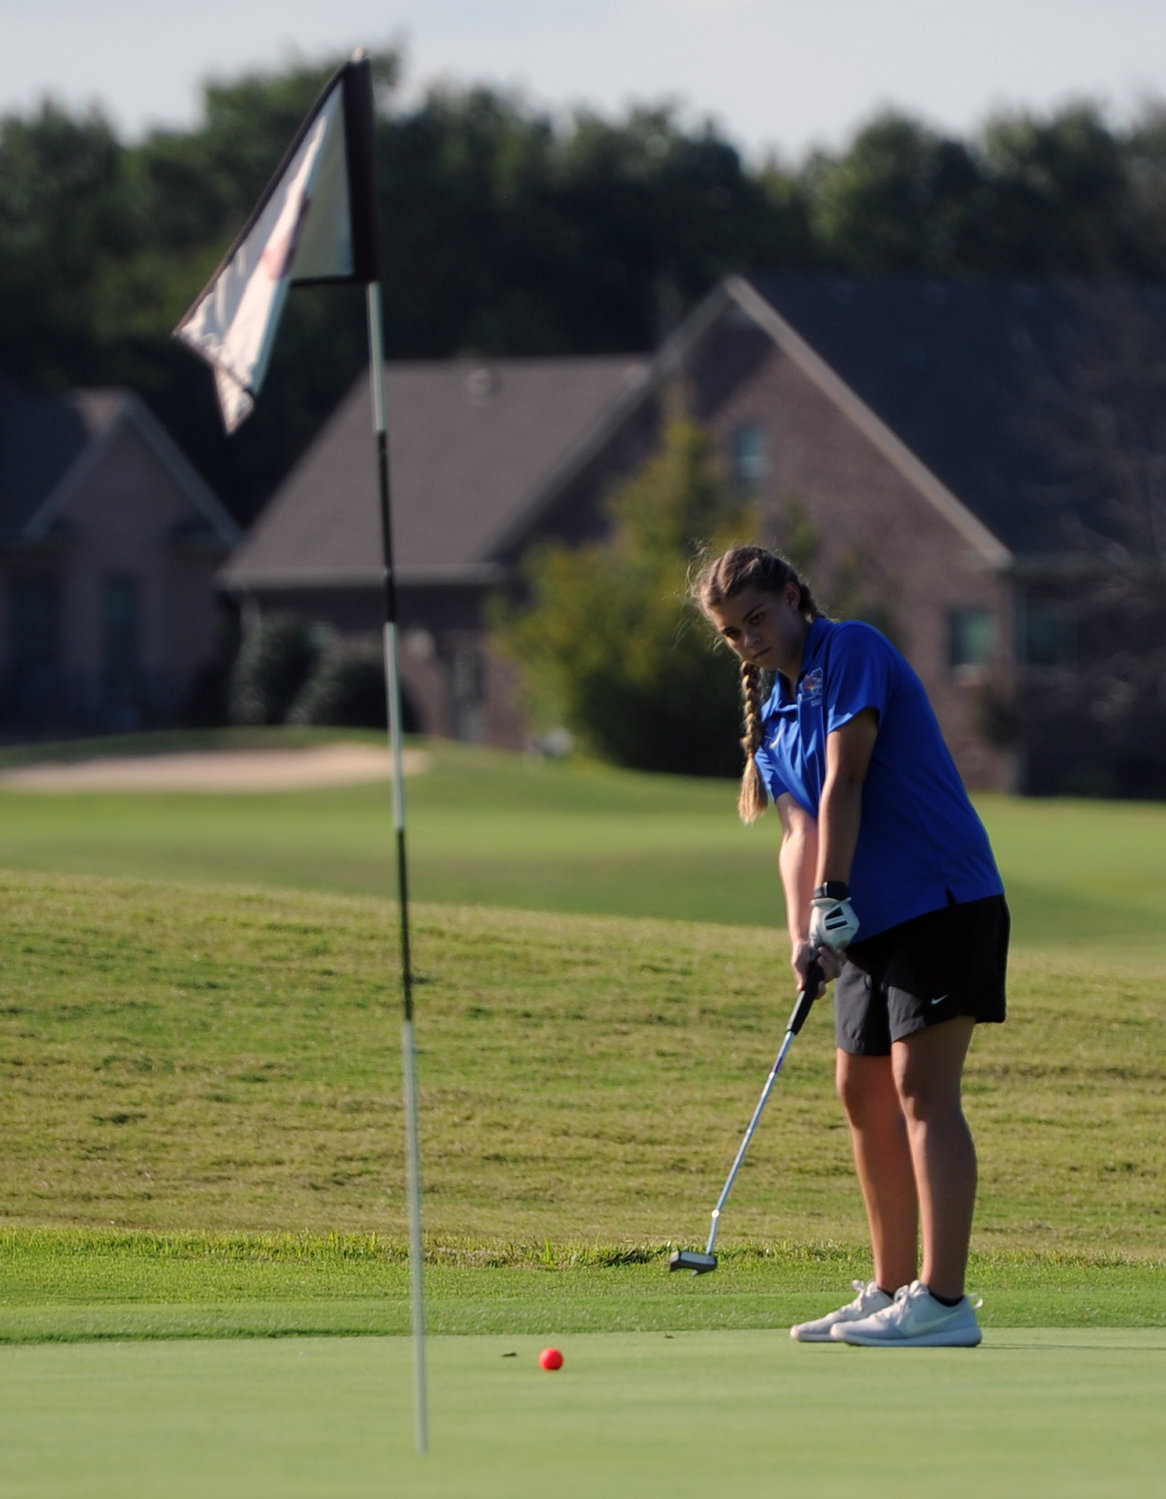 Marshall County’s Nellie Neece lines up her putt on Hole 9 at Saddle Creek.